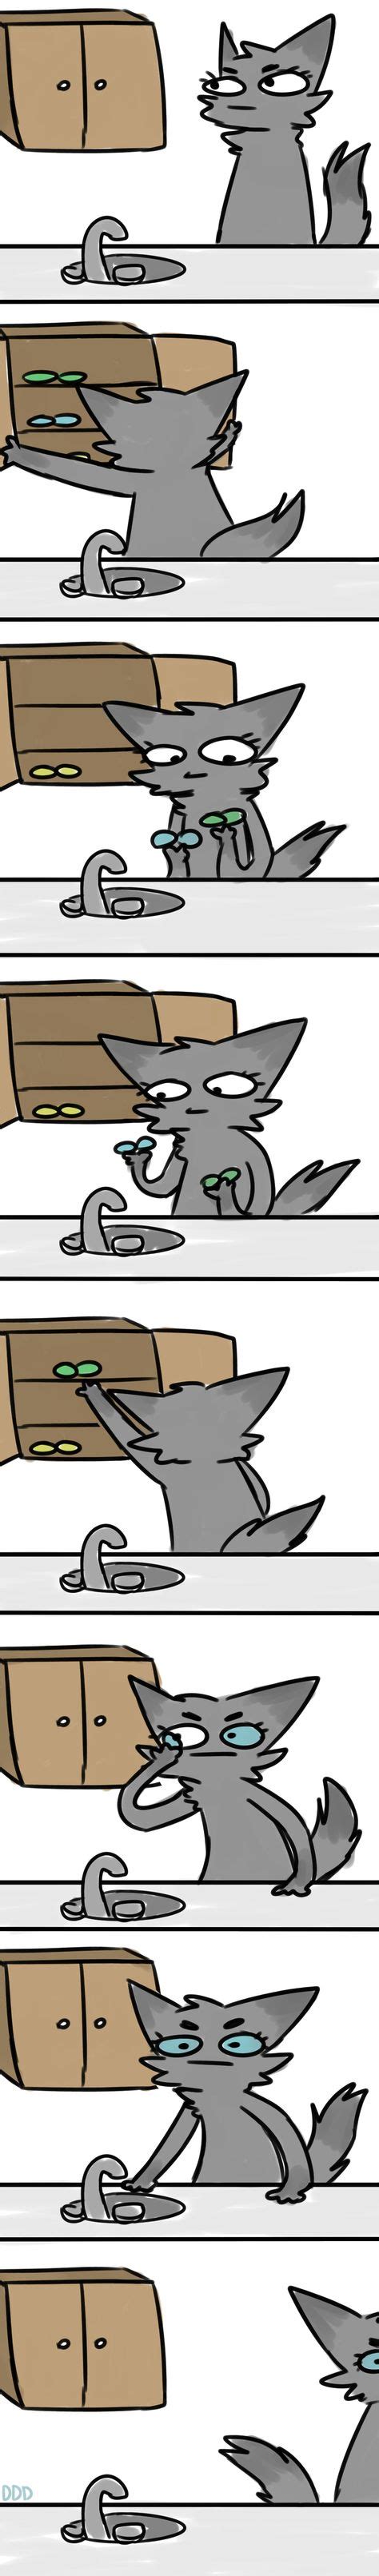 Dovewing By Diddlydarndunkaccino With Images Warrior Cats Funny Warrior Cats Comics